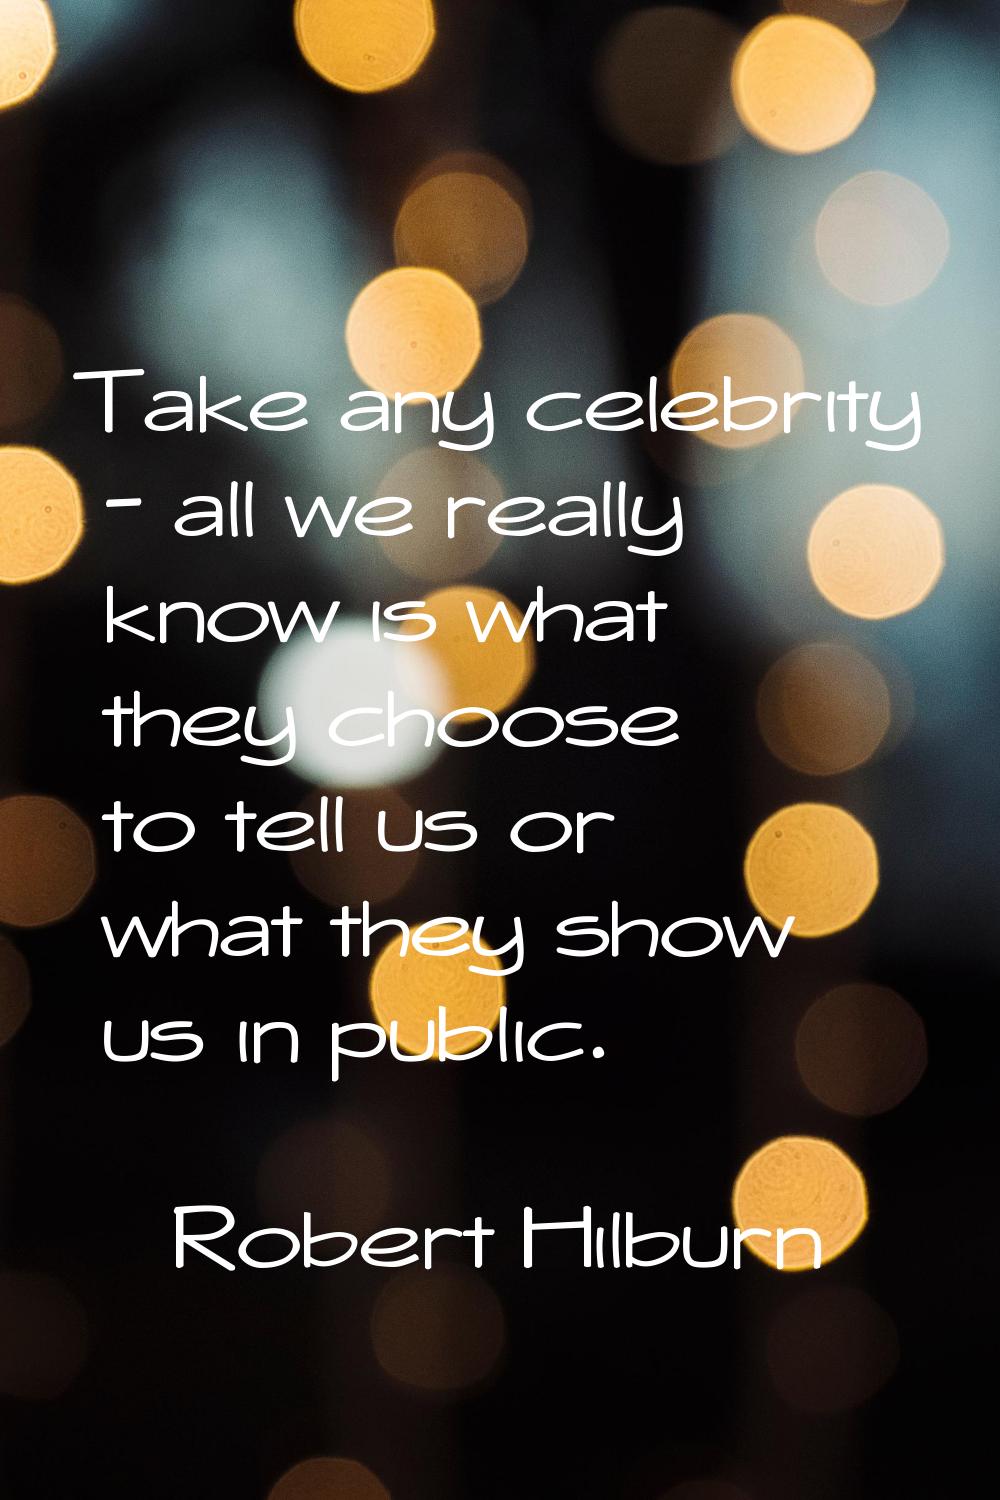 Take any celebrity - all we really know is what they choose to tell us or what they show us in publ